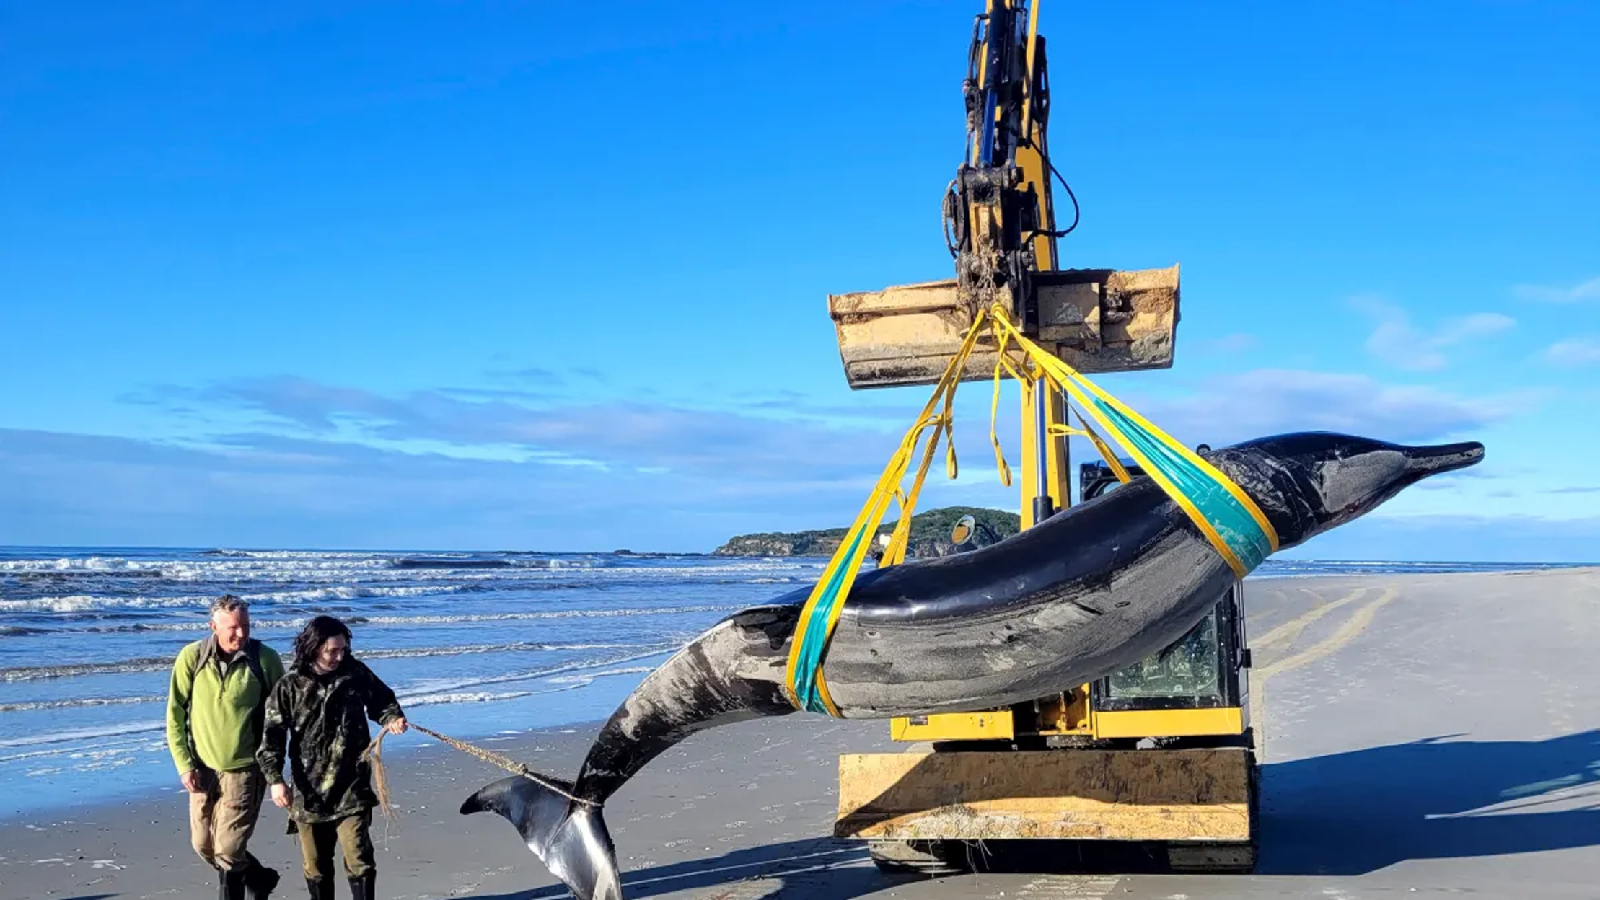  Ultra-rare whale never seen alive washes up on on New Zealand beach — and scientists could now dissect it for the 1st time 